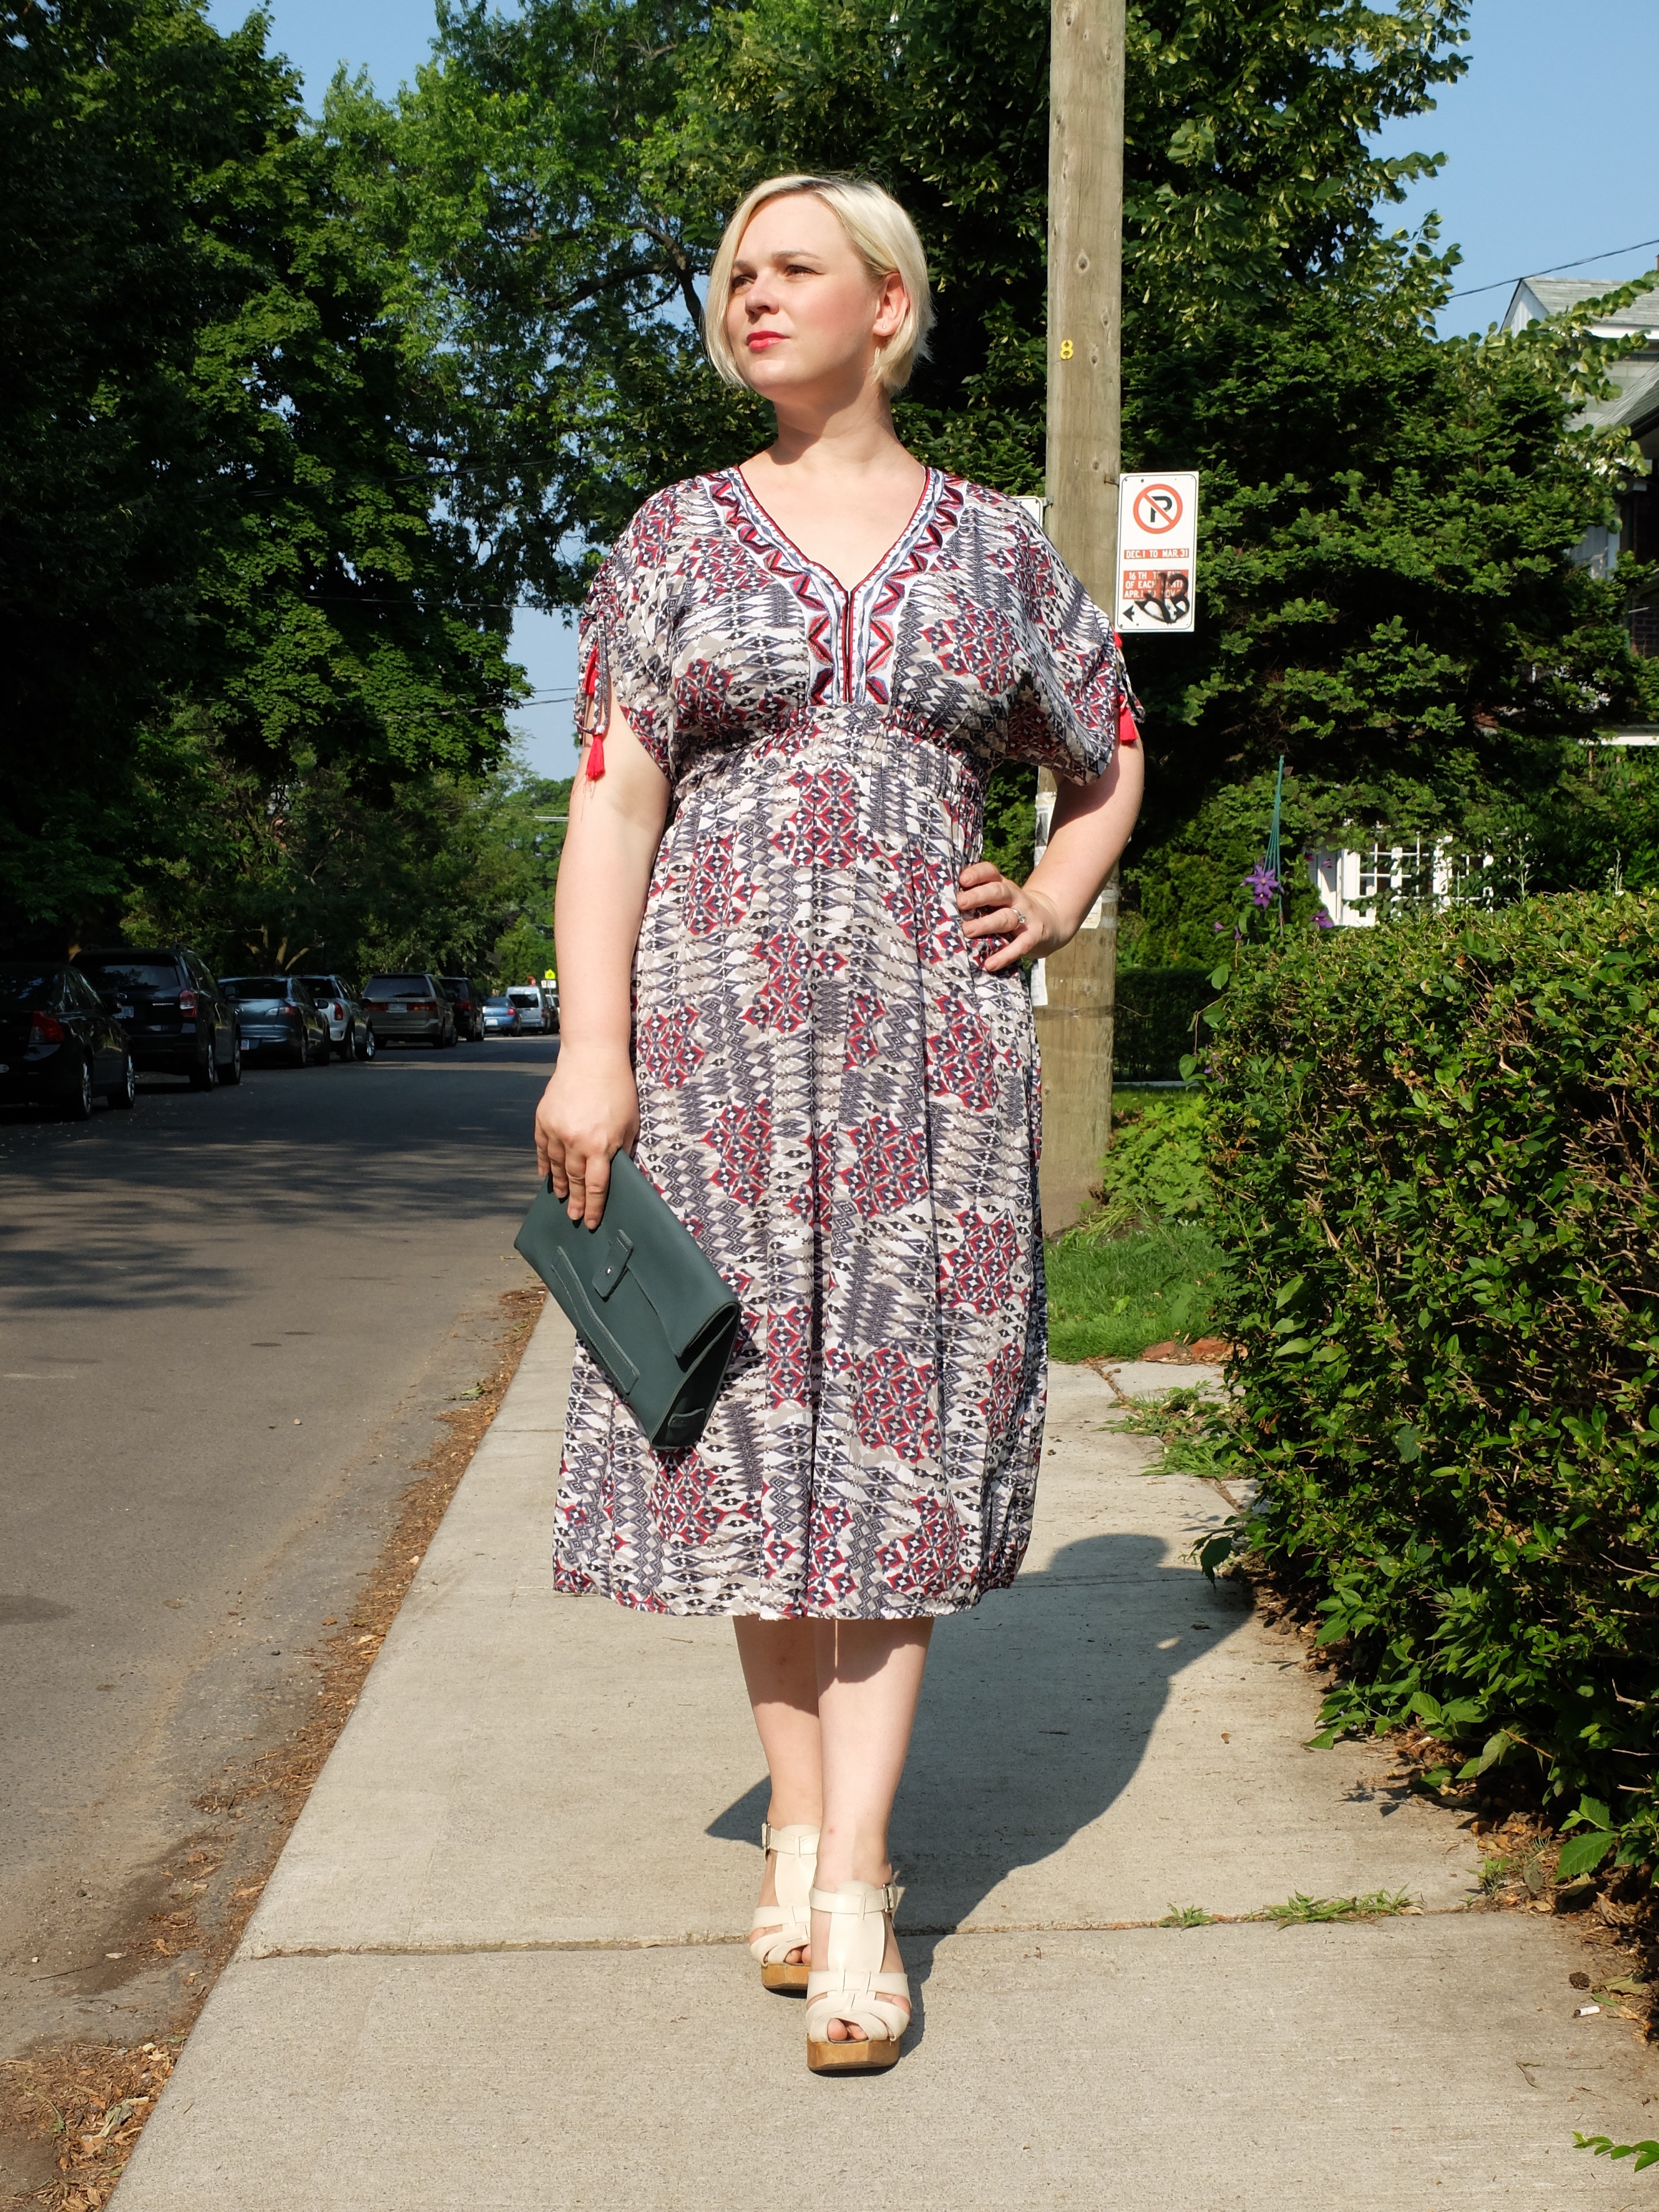 What I Wore- eShakti - Strolling the City in Heels